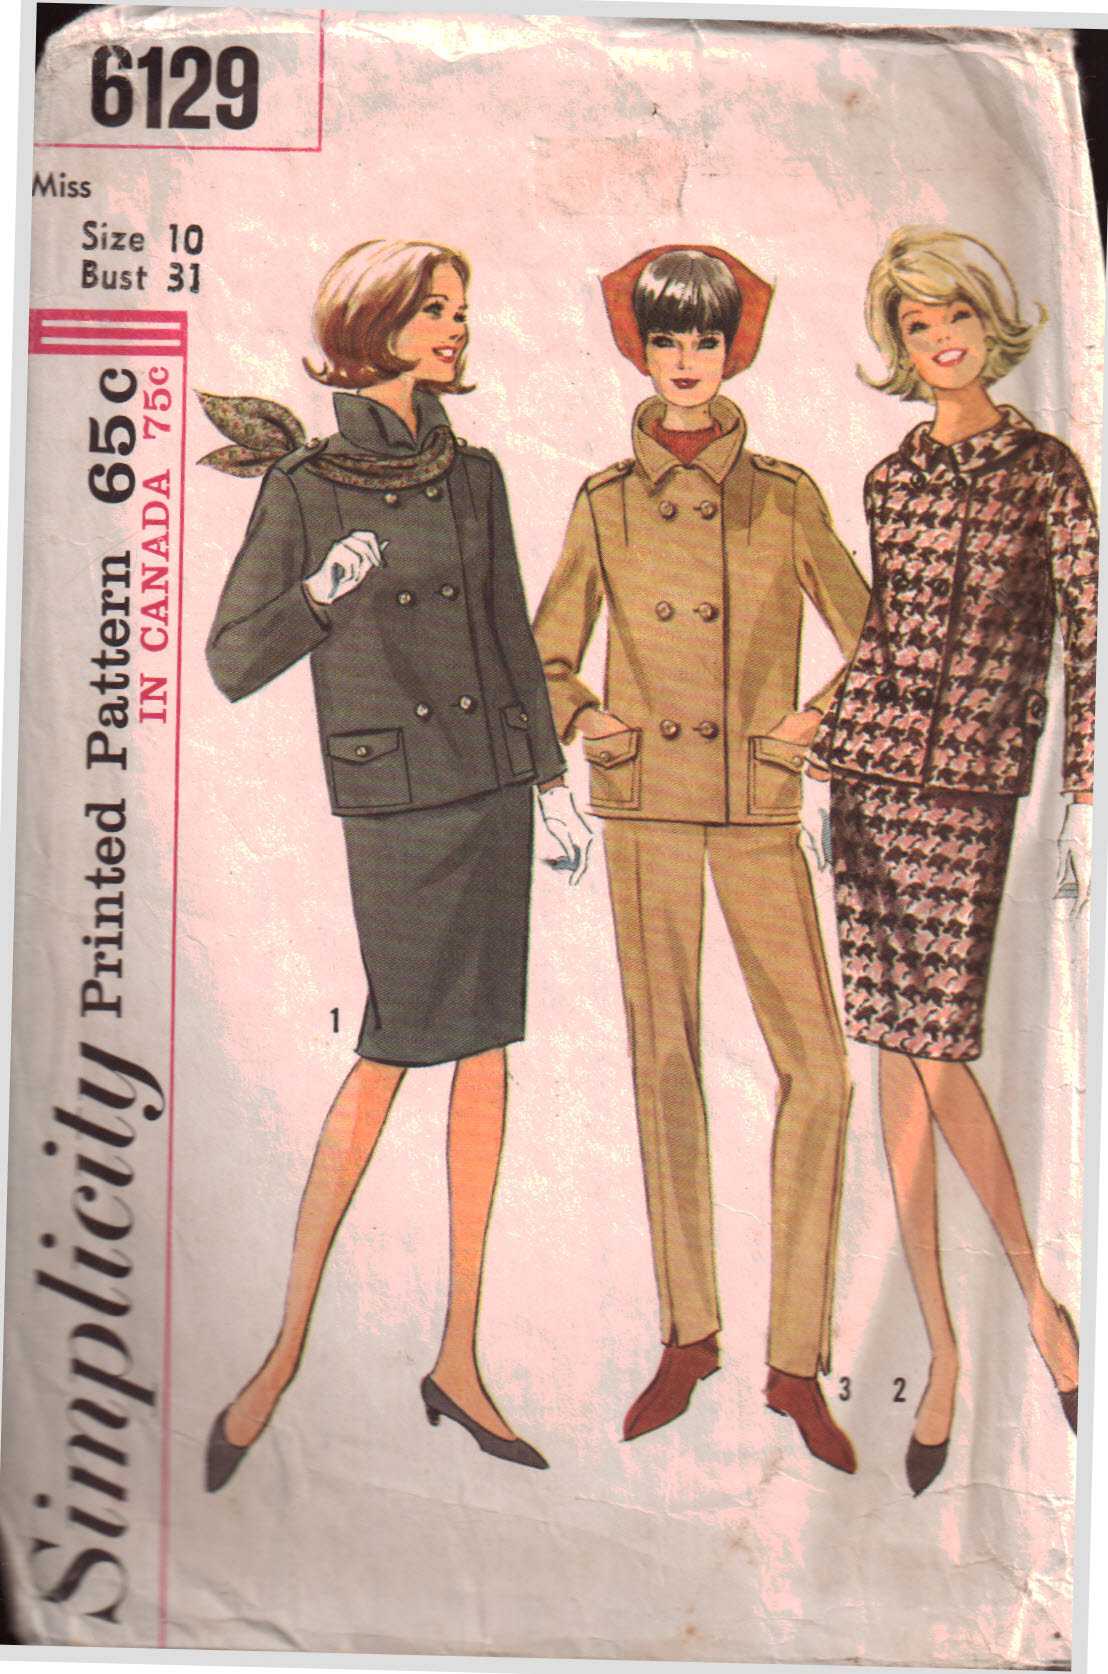 Amazon.com: New Look Ladies Sewing Pattern 6035 Jackets, Tops, Skirt & Trouser  Suit : Arts, Crafts & Sewing